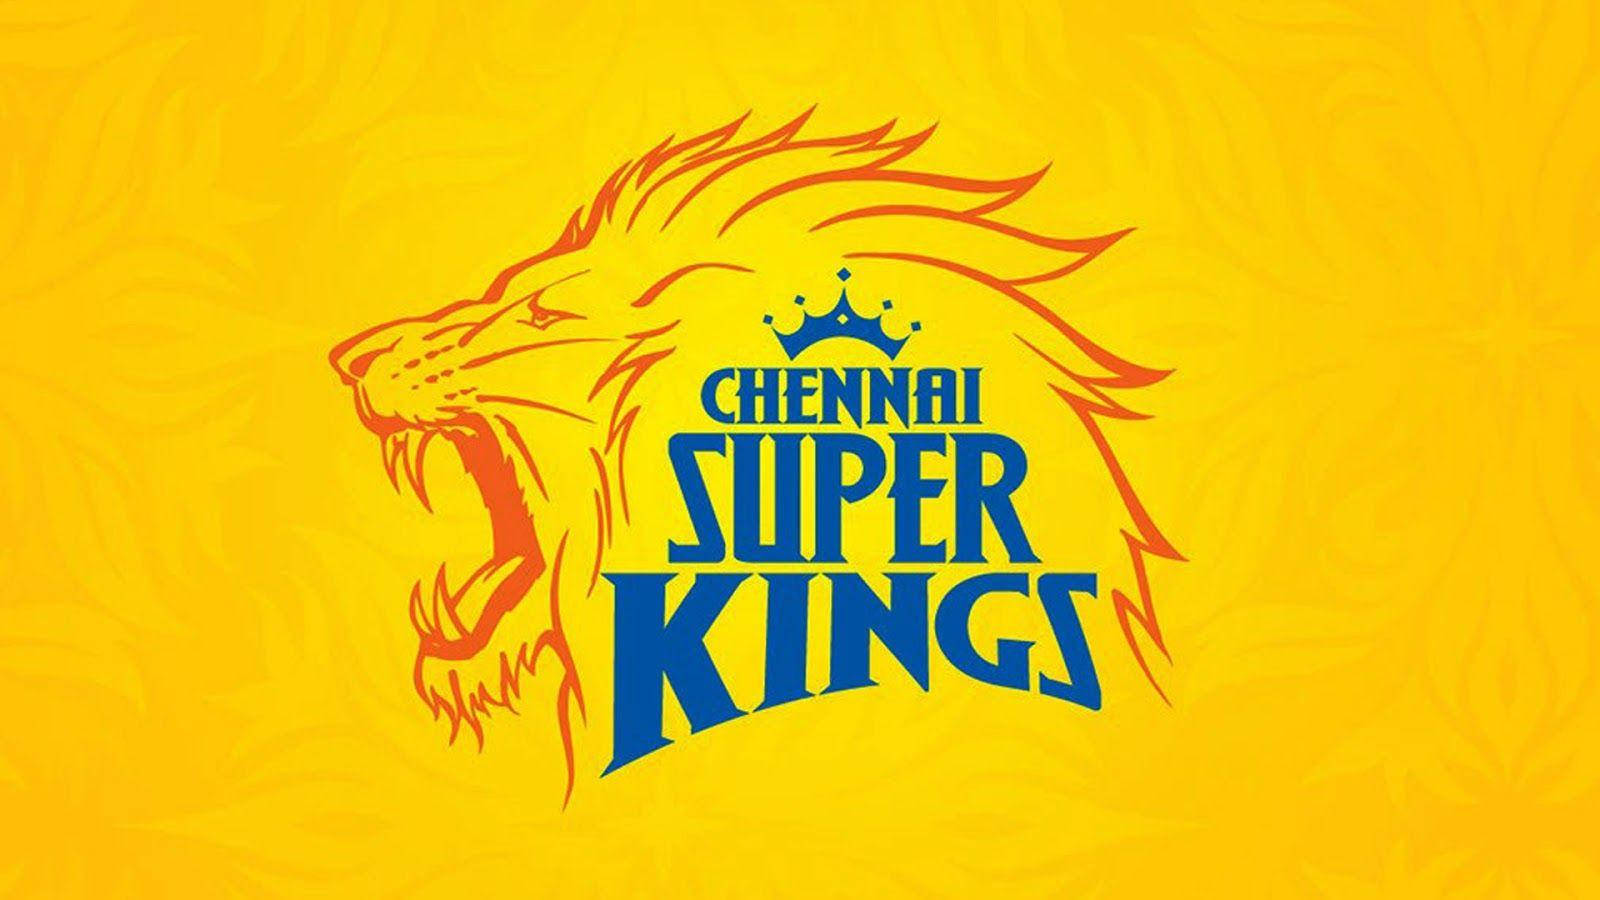 Csk Lion Poster Background